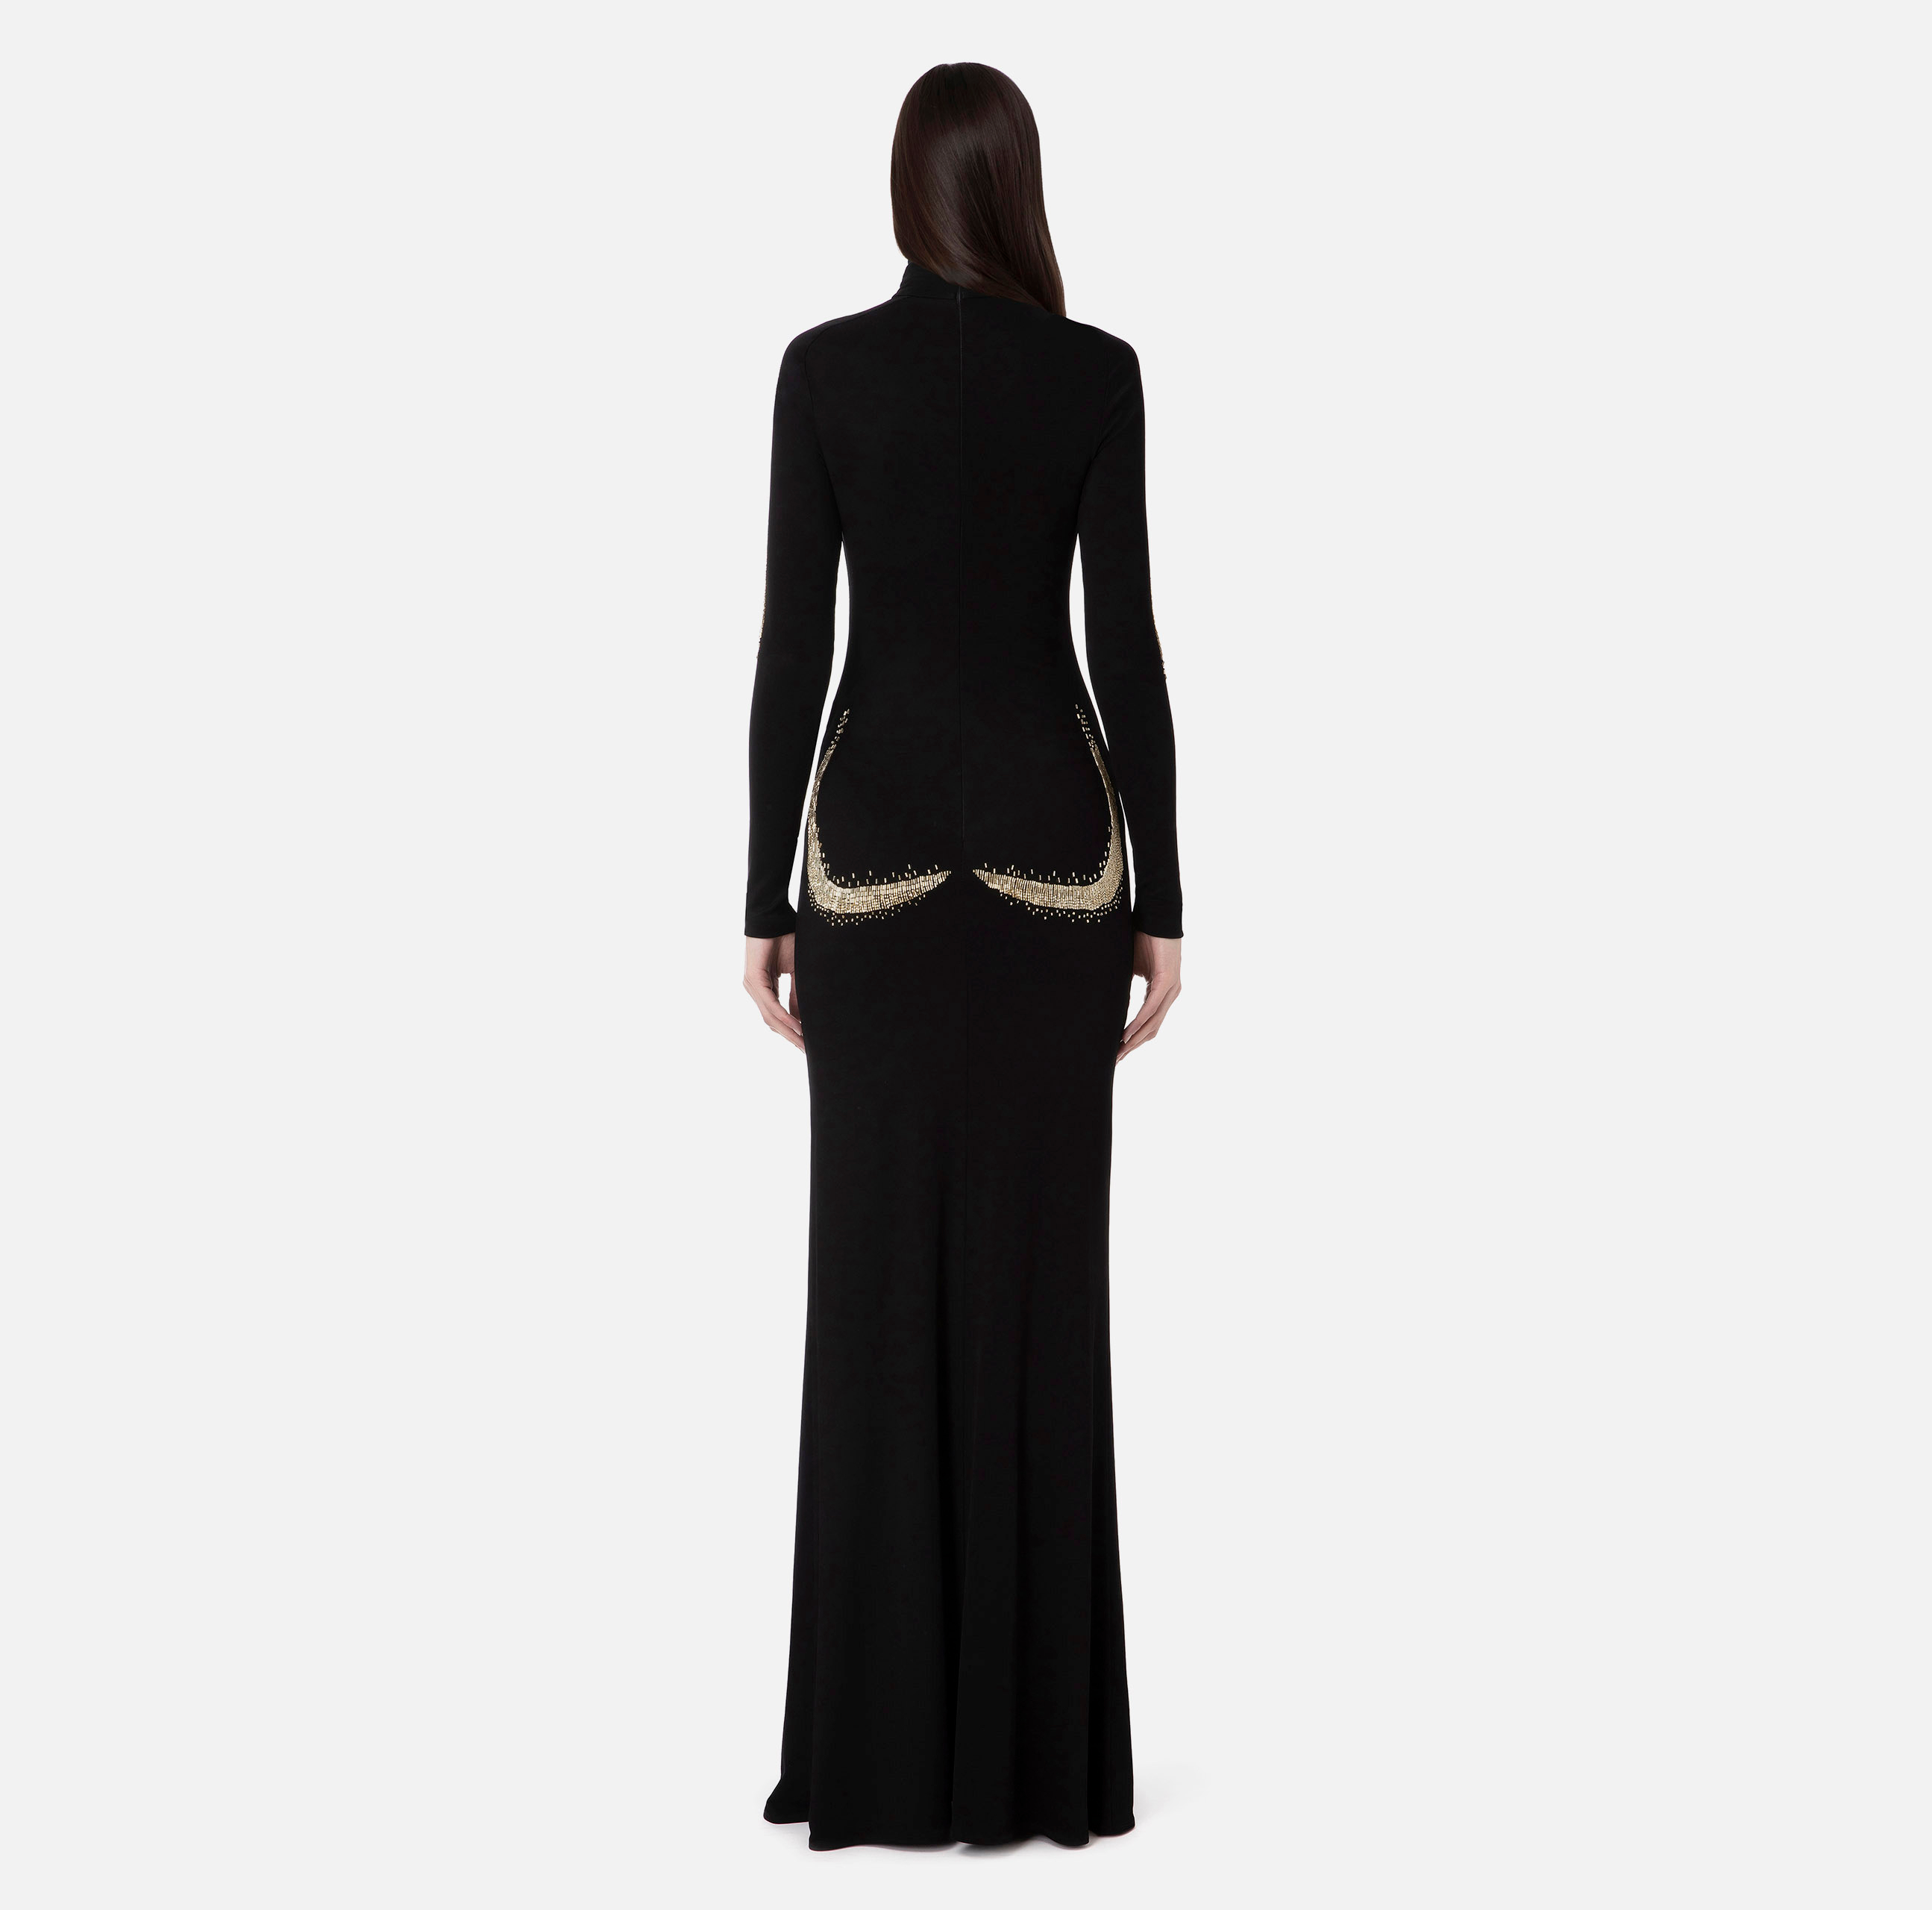 Red carpet dress with female silhouette - Elisabetta Franchi